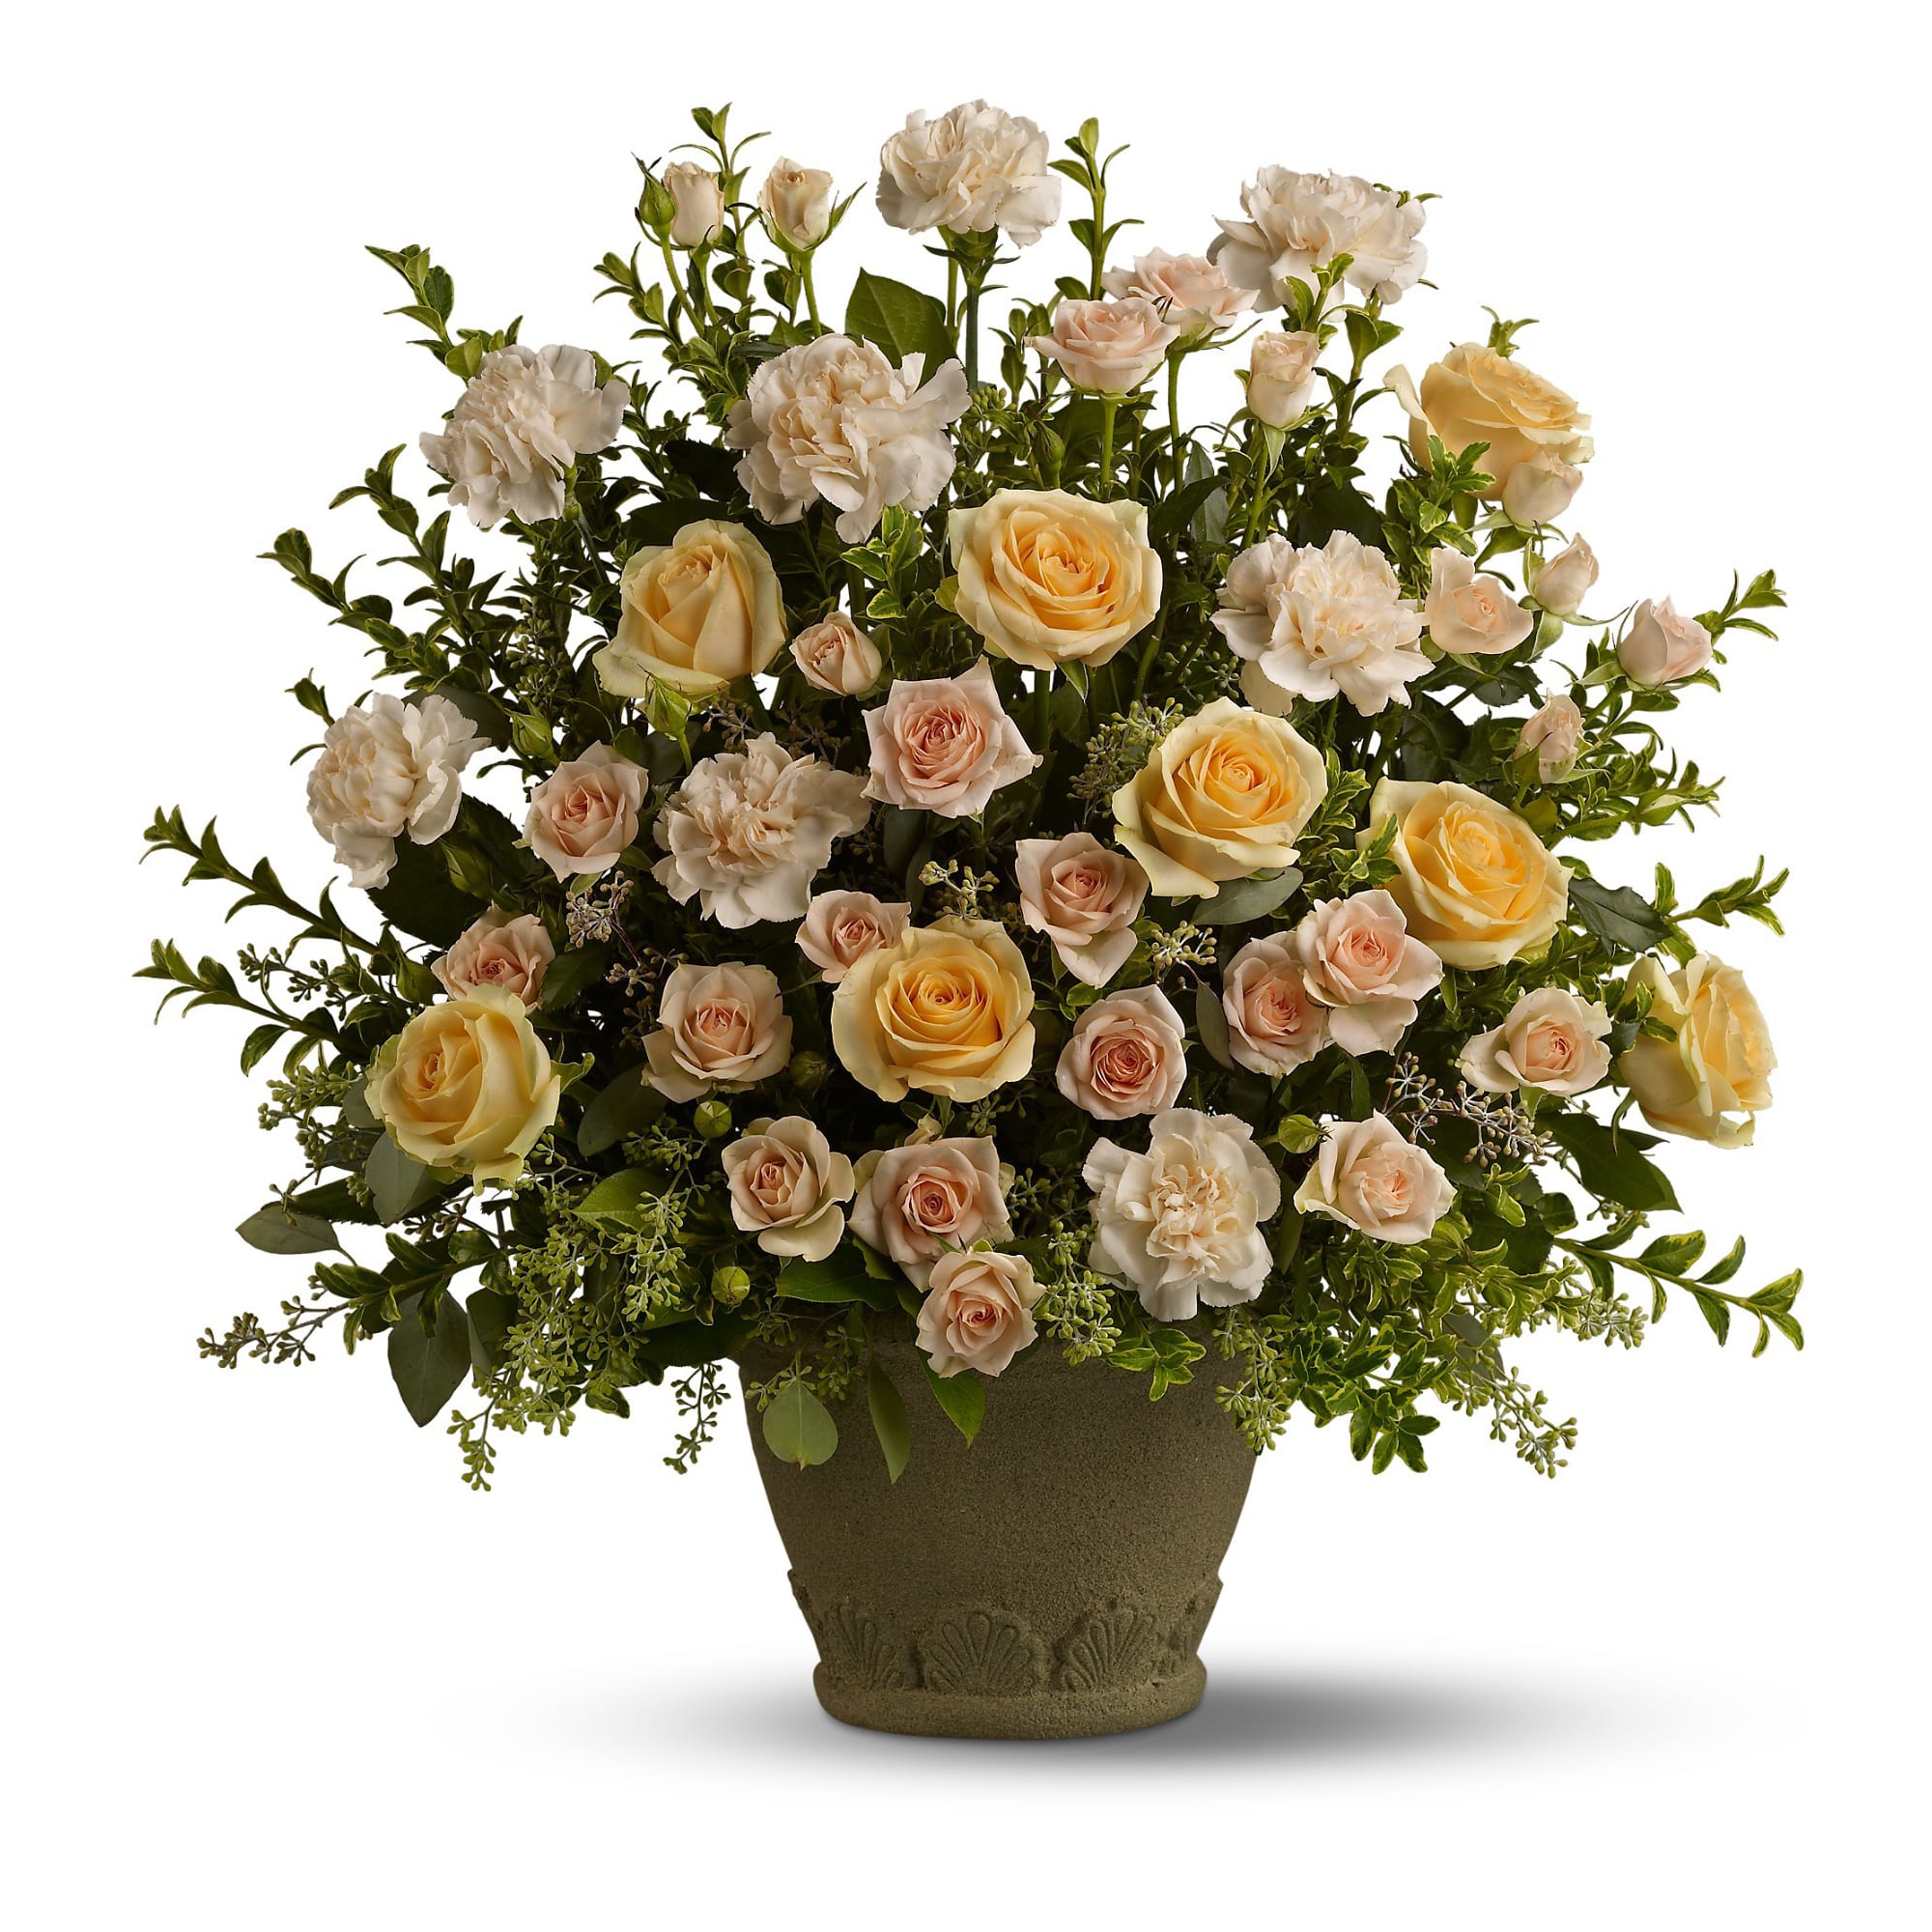  Rose Remembrance Basket - To create a truly stunning tribute, choose a magnificent, fragrant display of peach roses, spray roses and carnations - accented with greenery, and displayed in a classic Grecian Garden urn. A gracious mark of respect for a life well lived. 